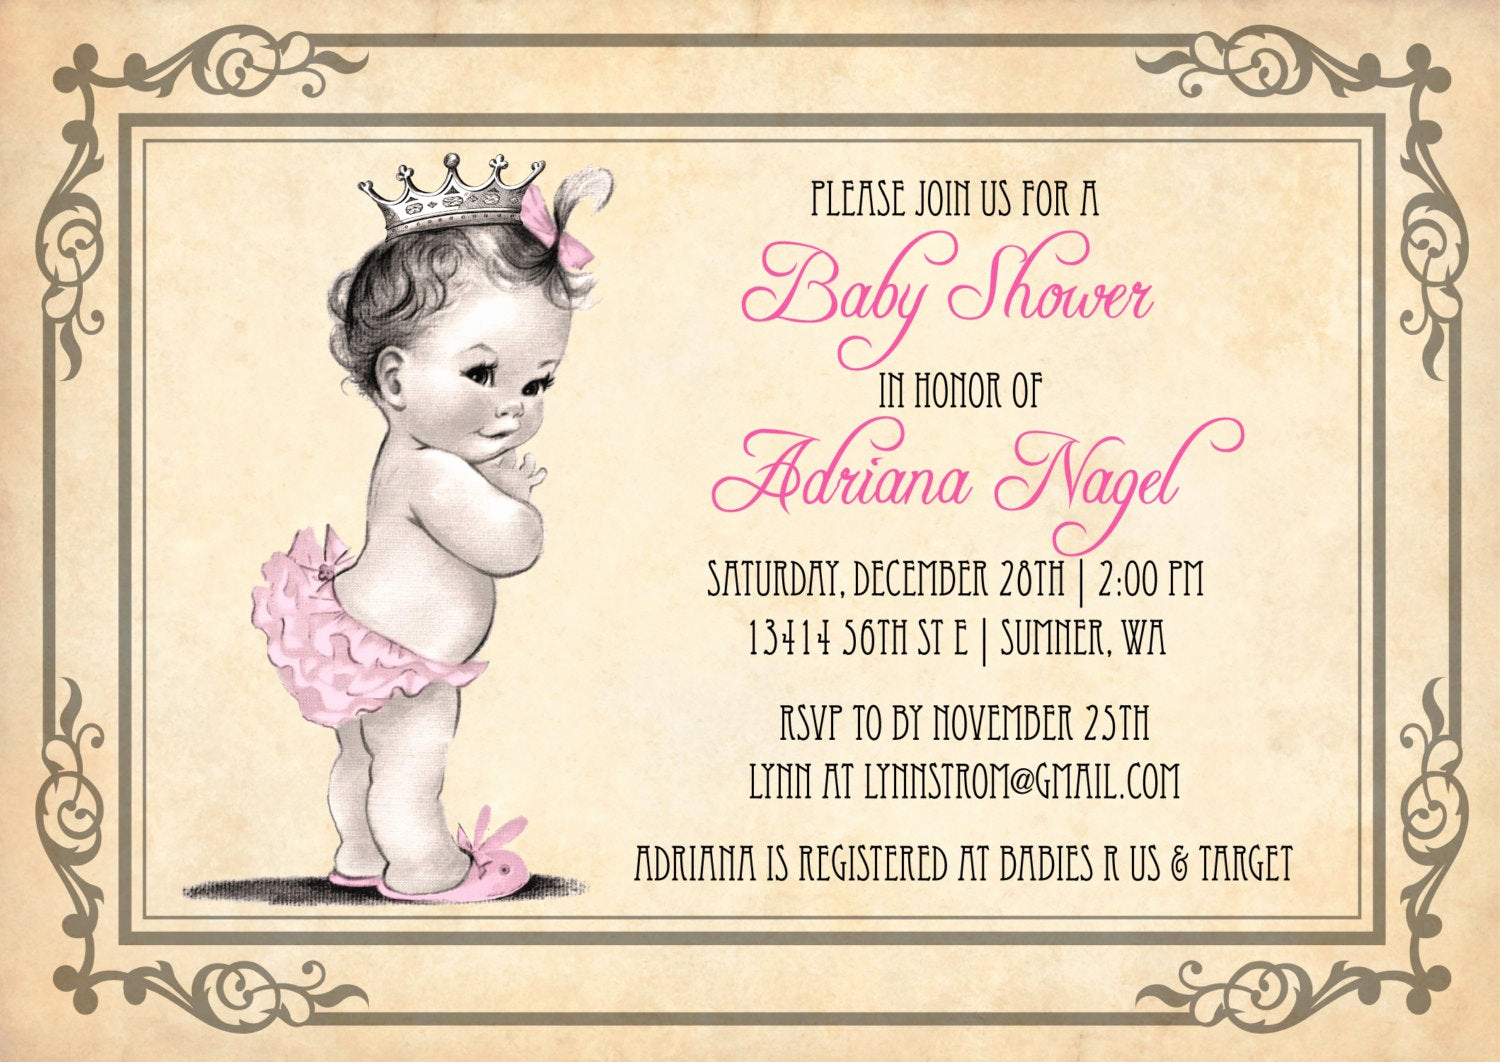 Baby Shower Invitation Images Best Of Princess Baby Shower Invitation Girl Vintage Princess Baby